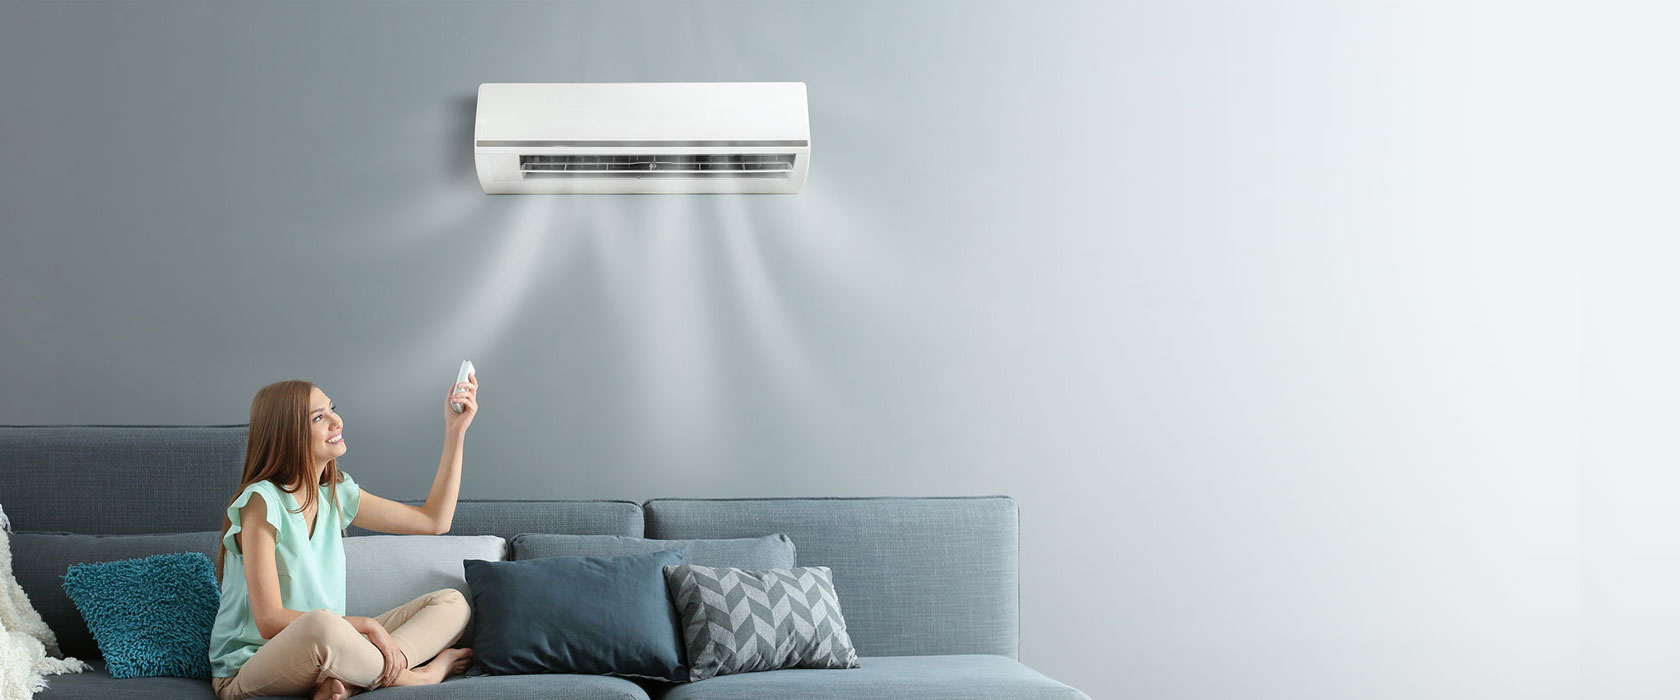 Cool your family during summer and warm up your home in winter with a new reverse cycle air conditioning system